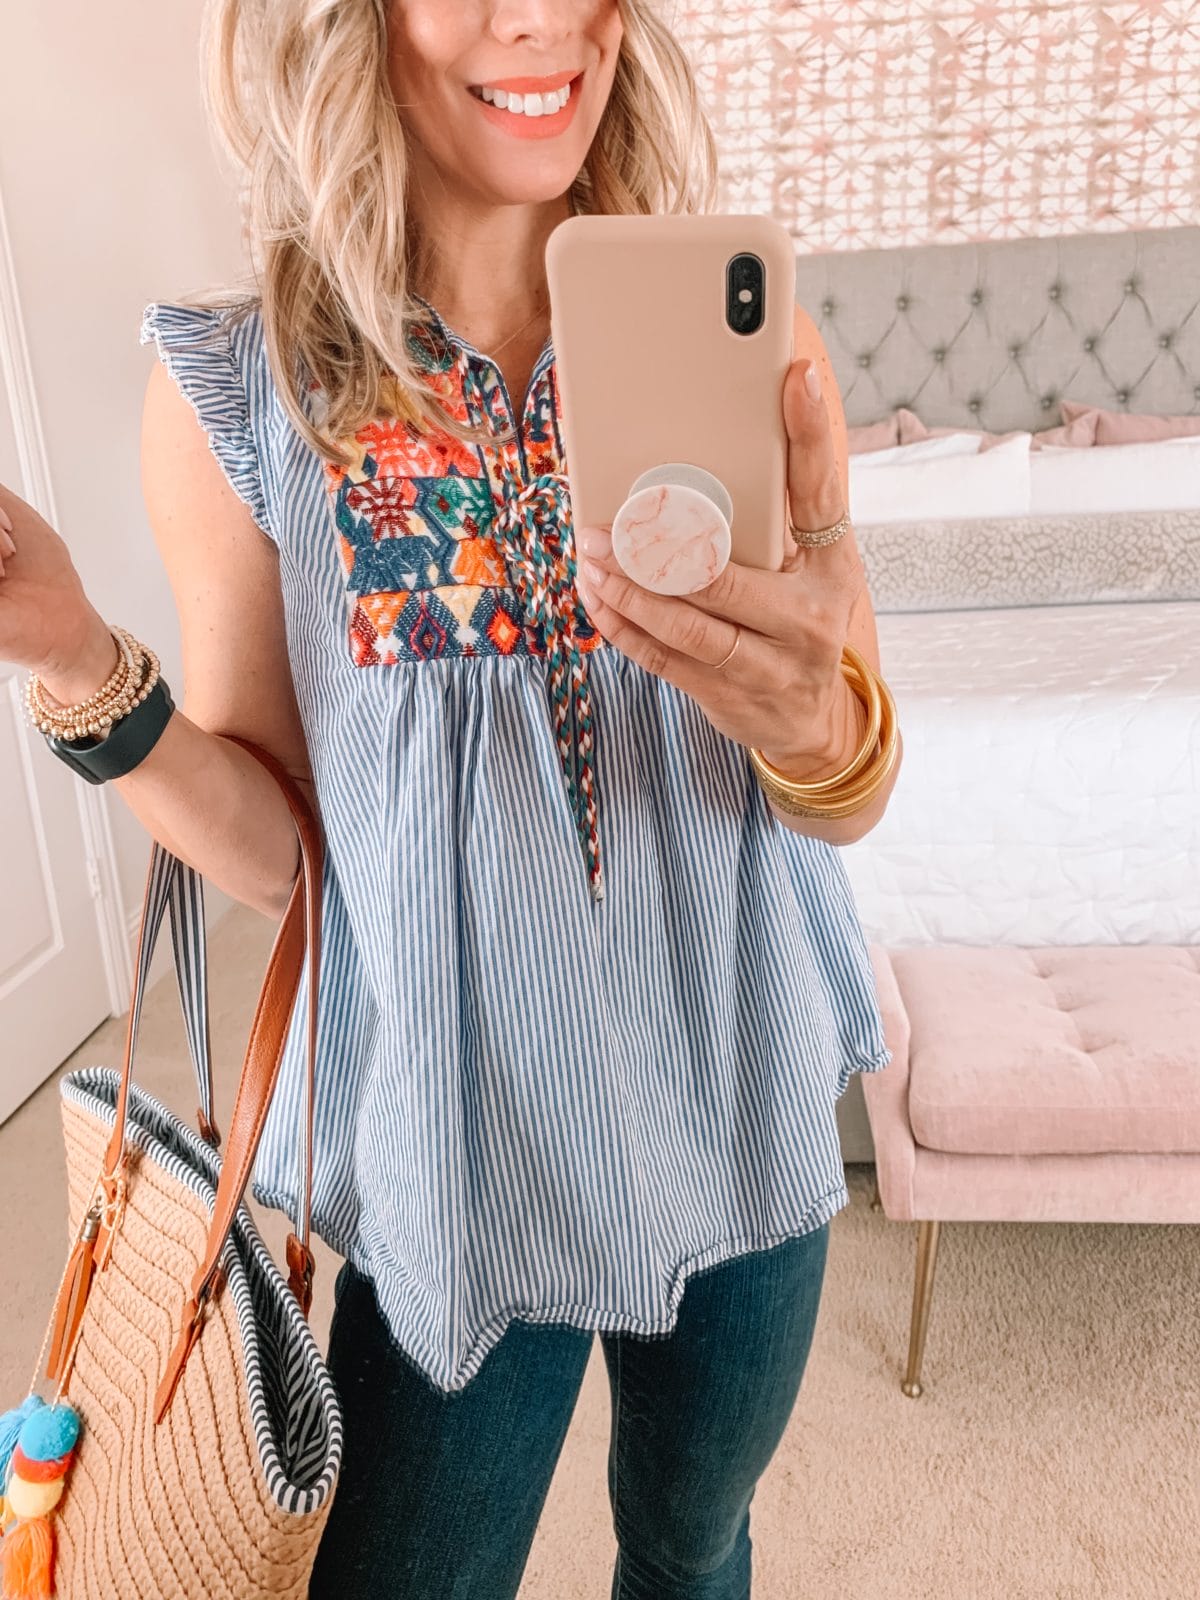 Amazon Fashion Faves, Embroidered Top, Jeans, Tote Bag with Tassel 